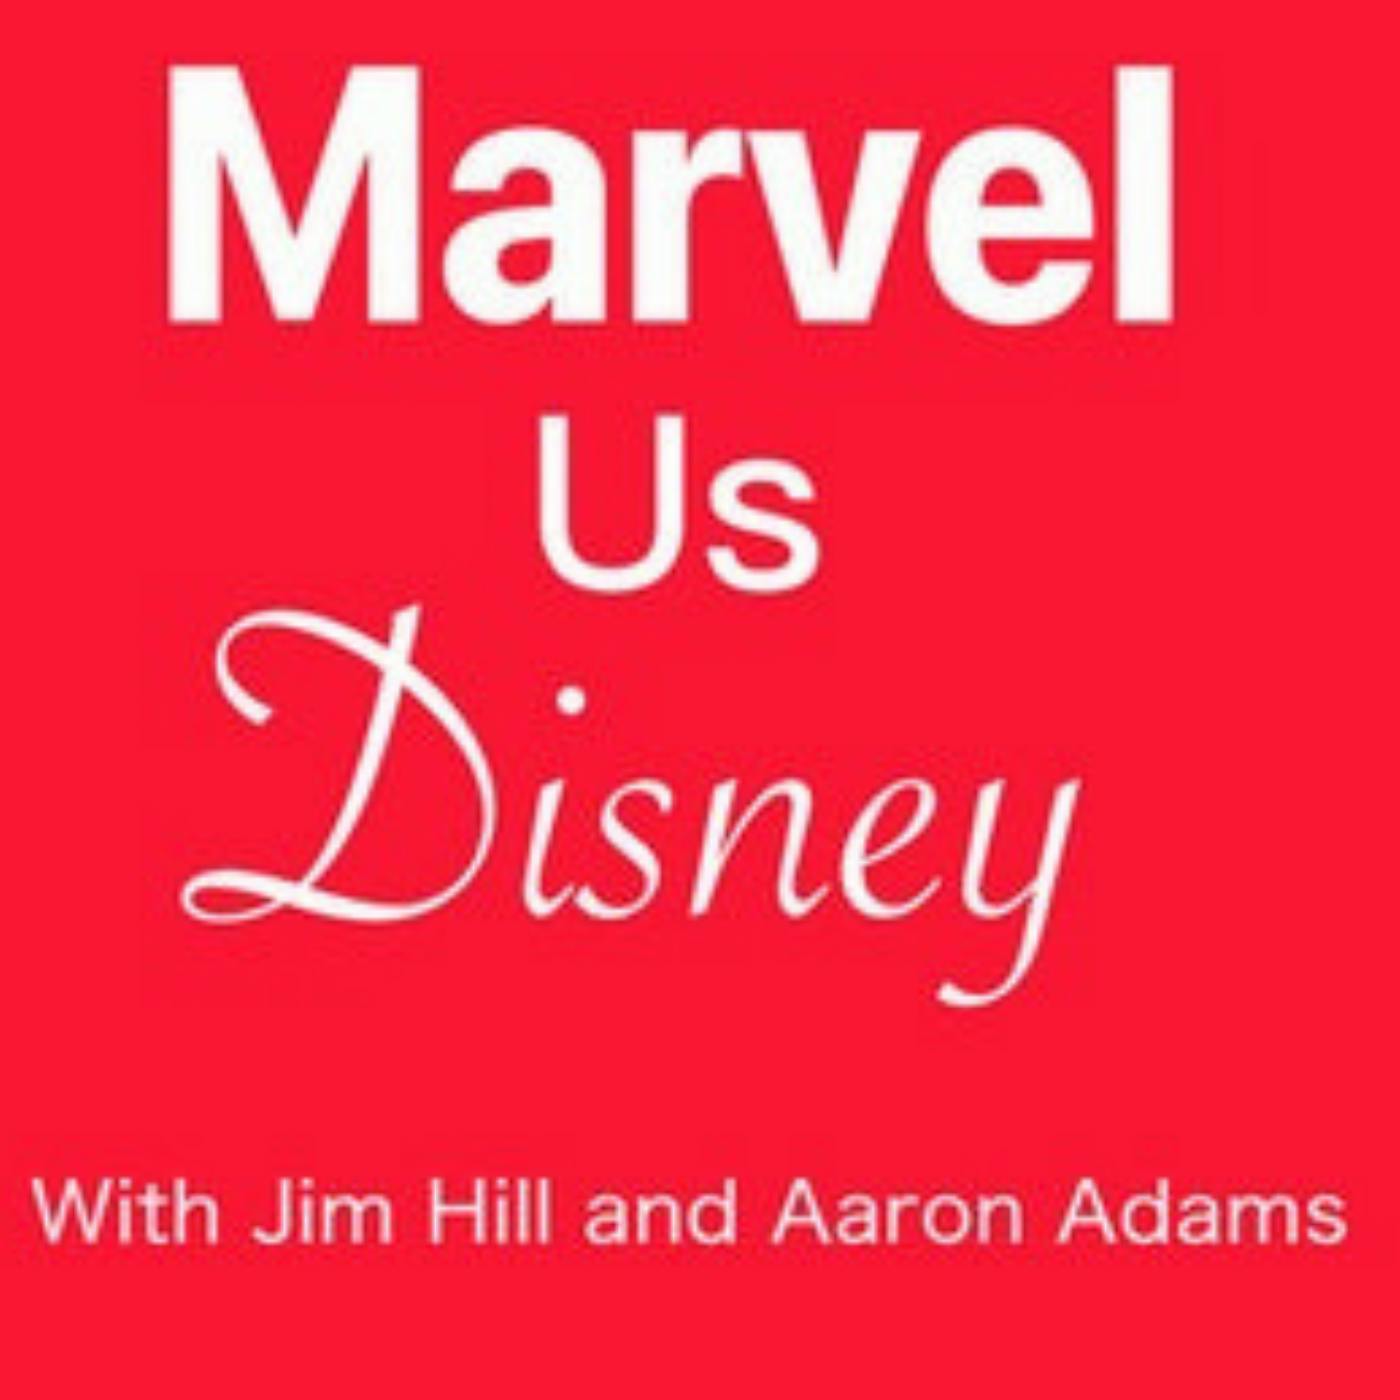 Marvel Us Disney Episode 134: She-Hulk: Attorney at Law” to premiere on Disney+ August 17th